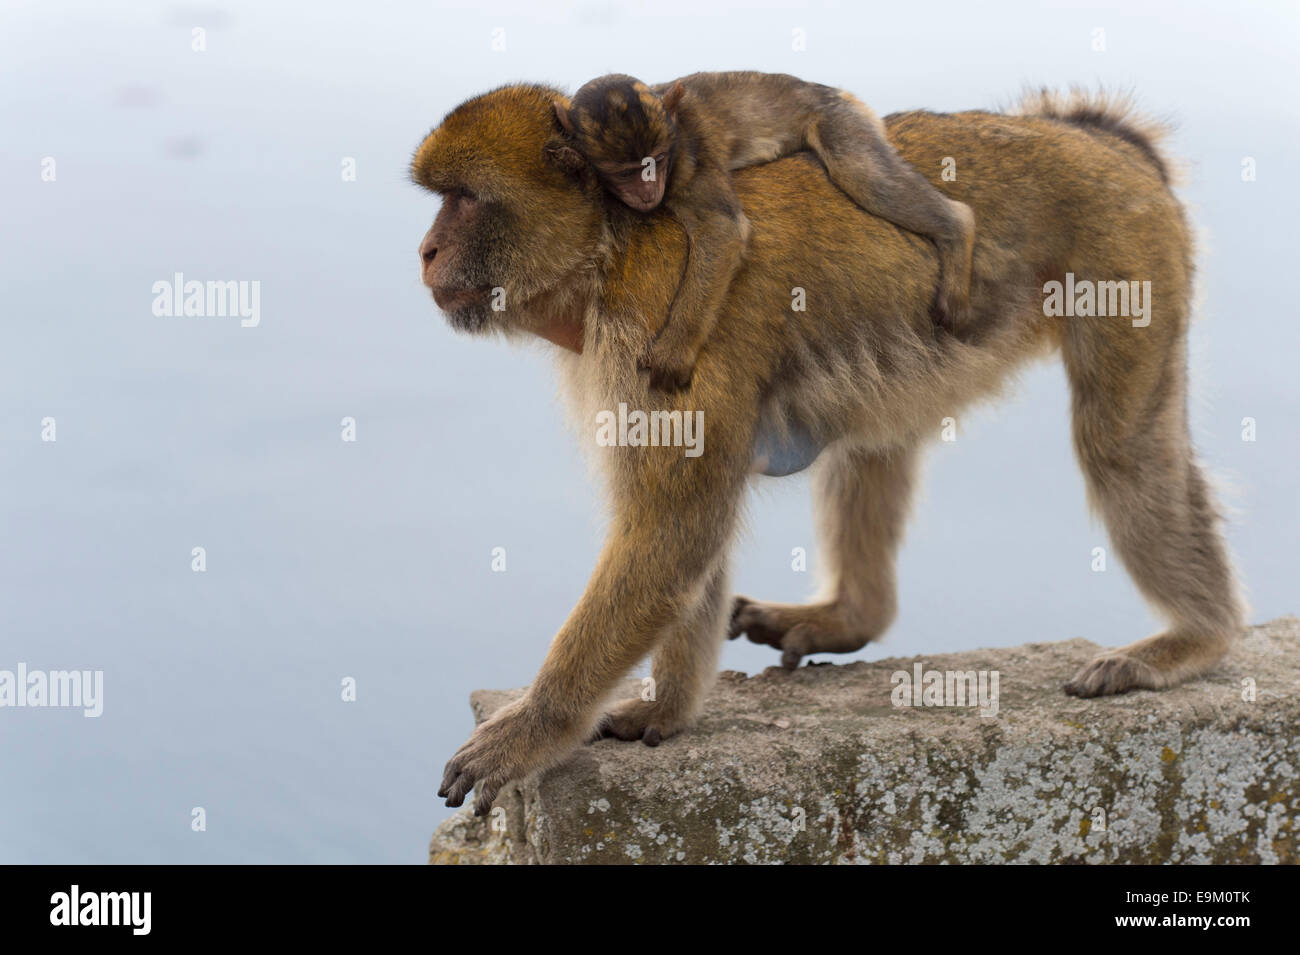 A barbary macaque monkey on the Rock of Gibraltar. Stock Photo